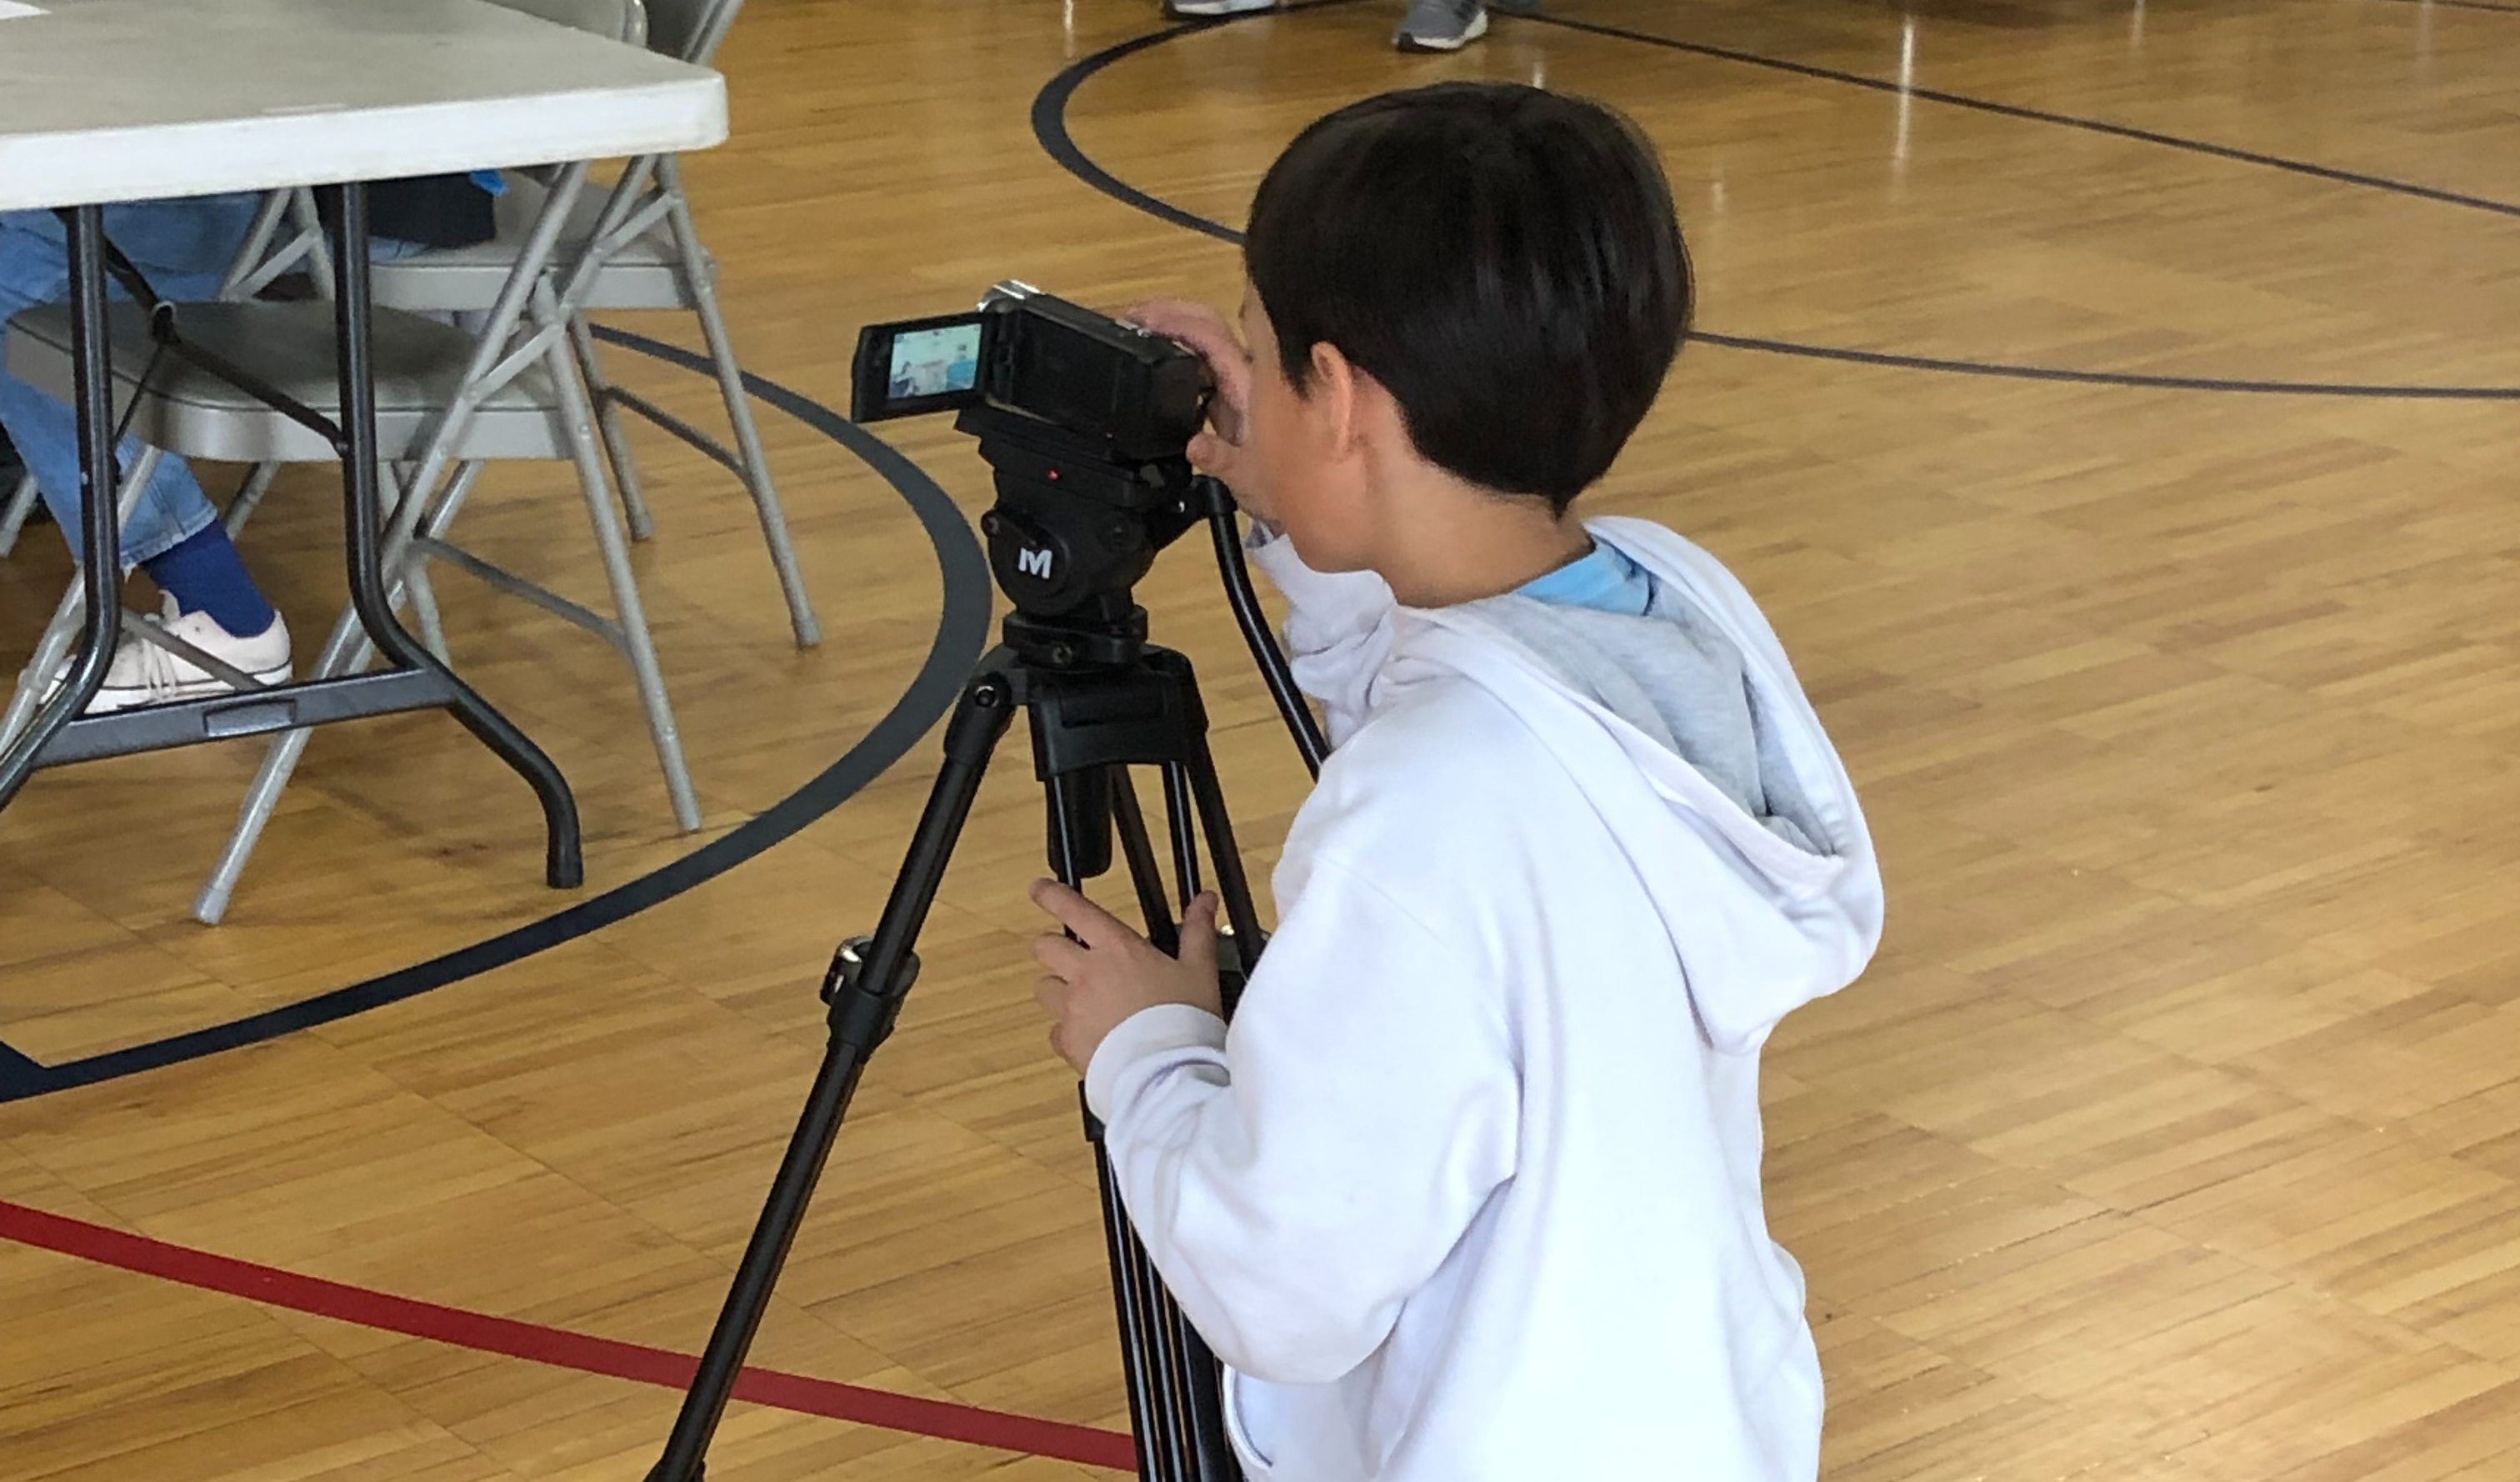 Student filming event